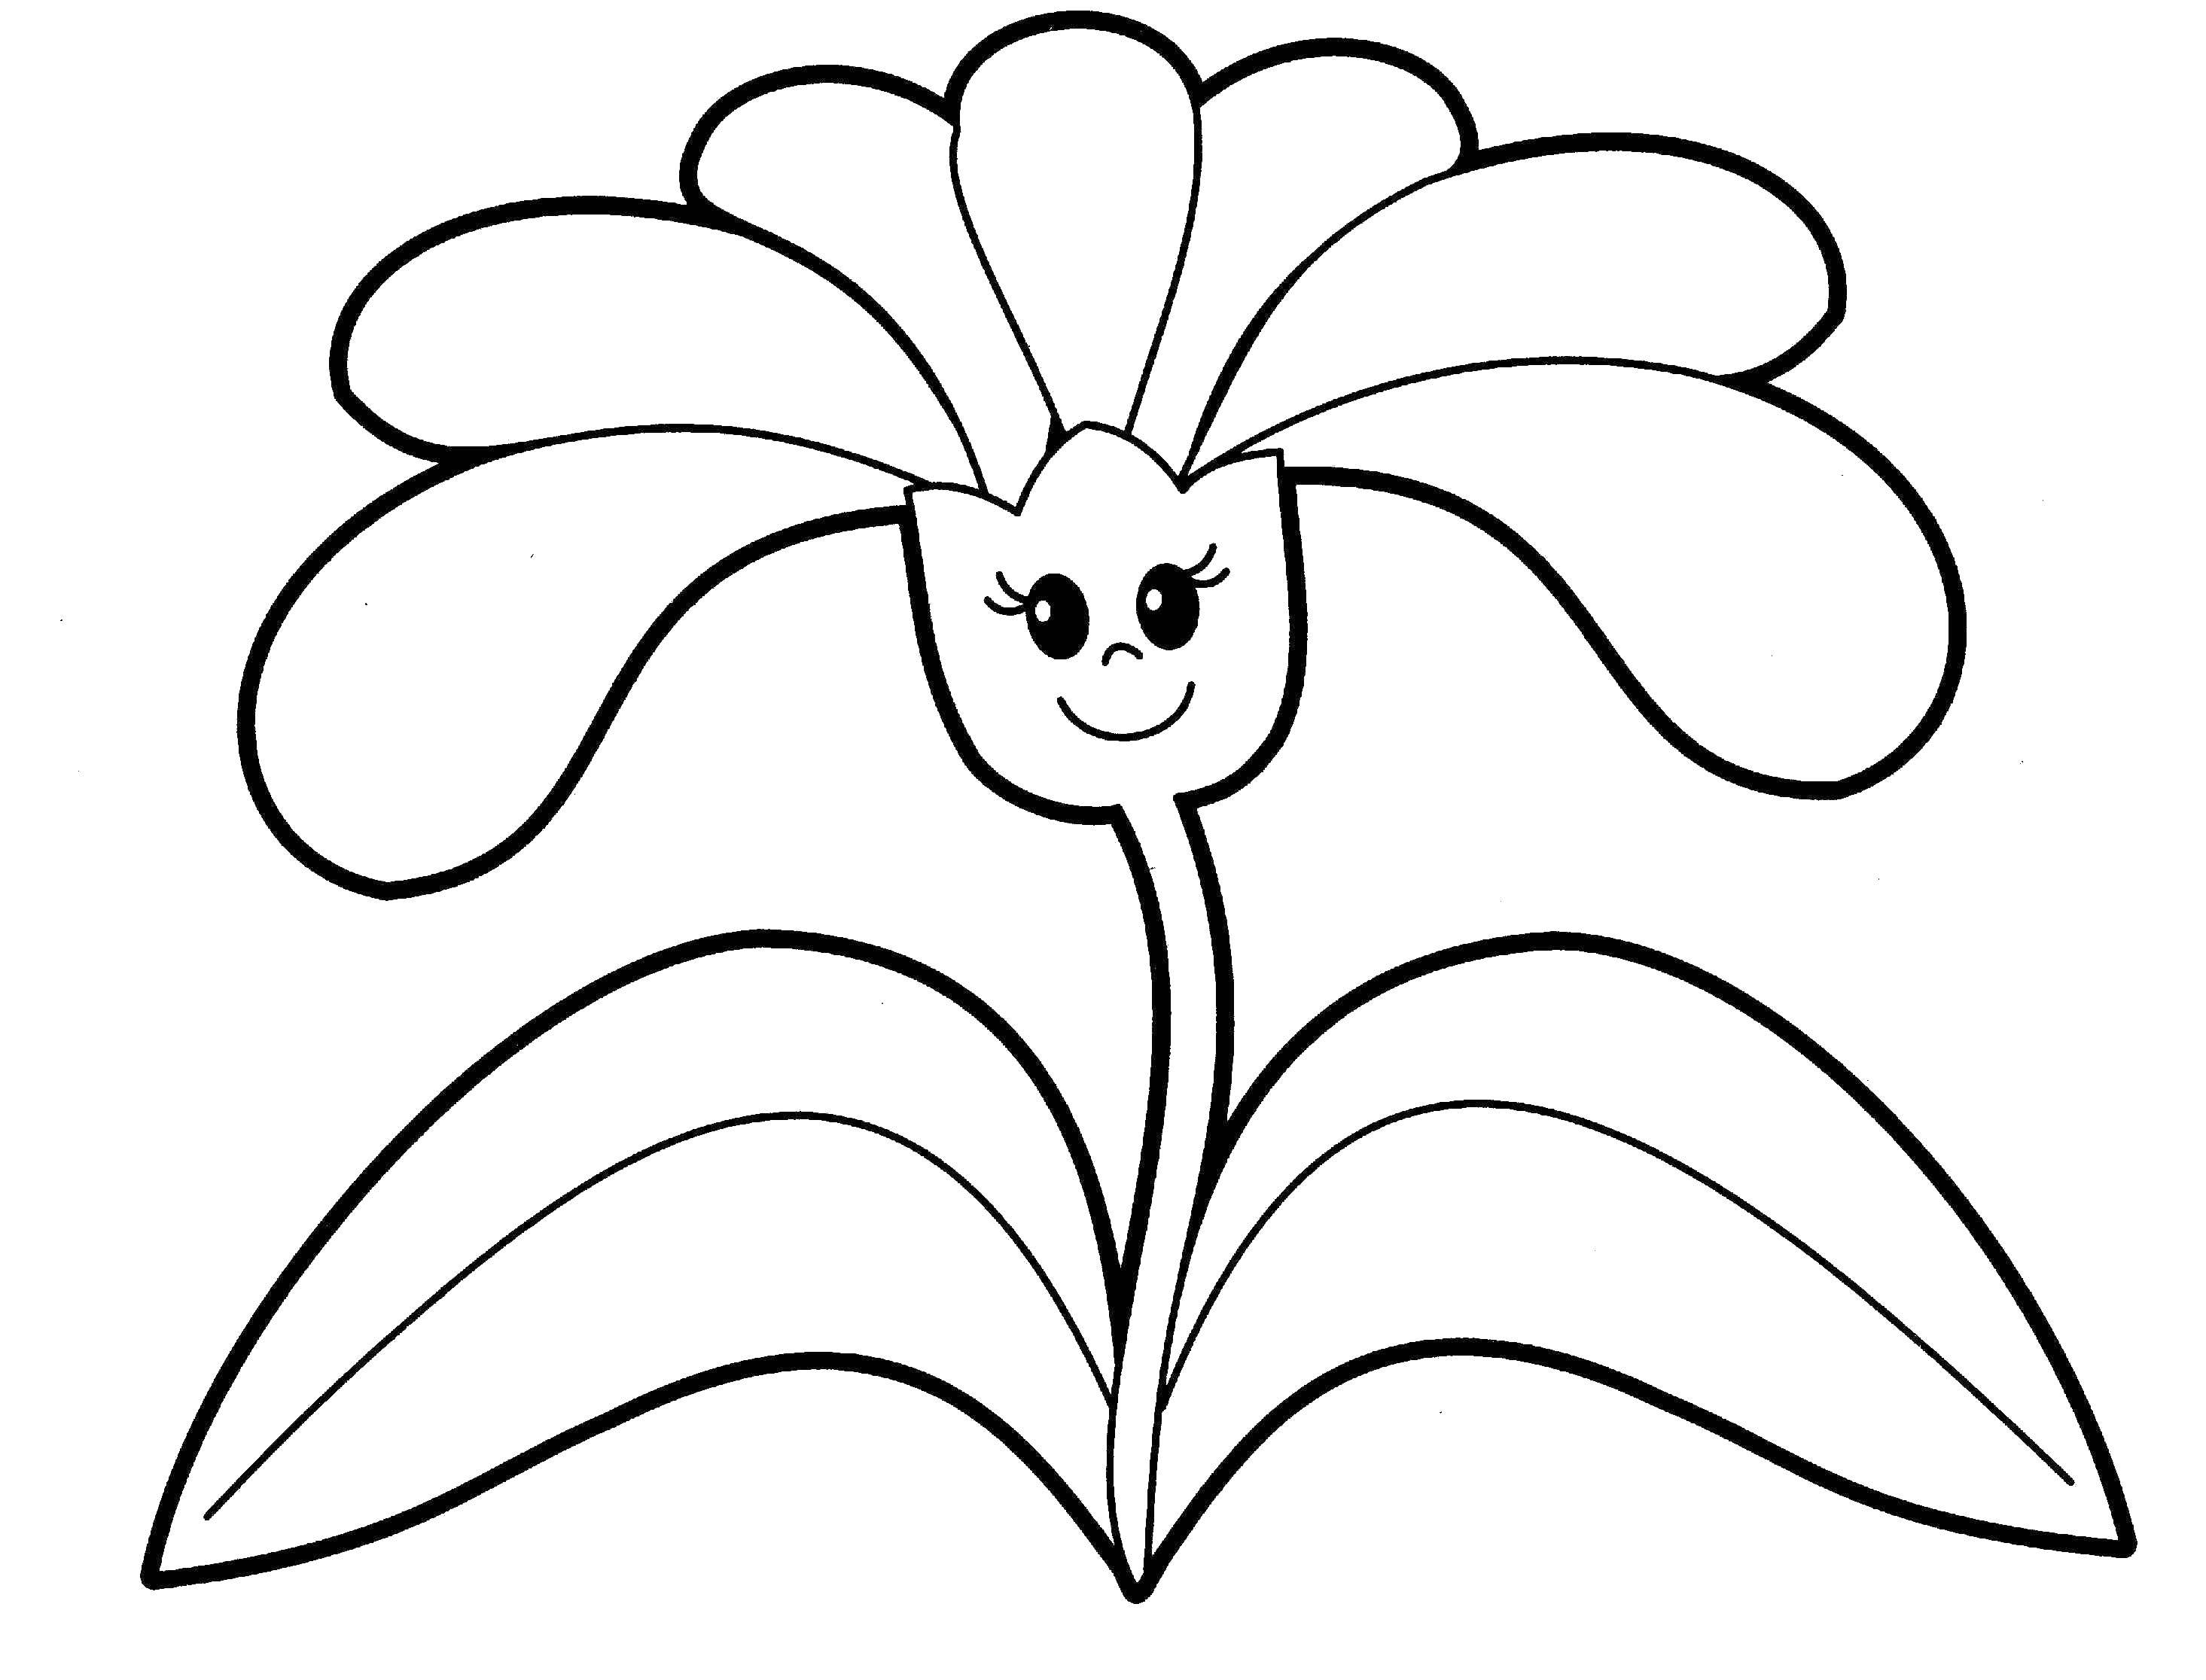 Coloring Daisy. Category little ones. Tags:  chamomile.